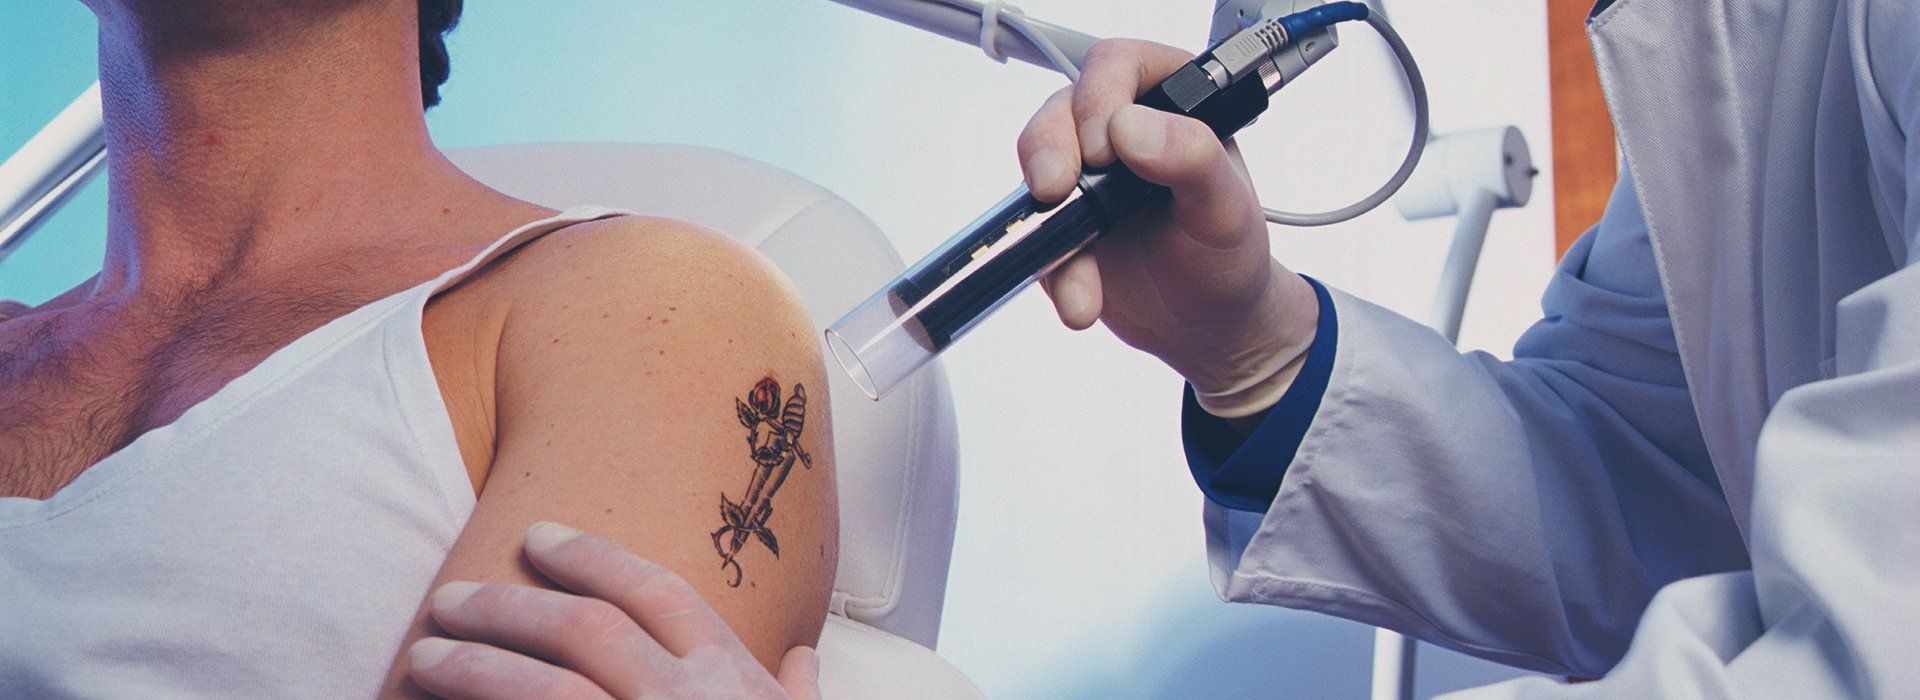 Types of Laser Tattoo Removal & How Tattoo Removal Lasers Work